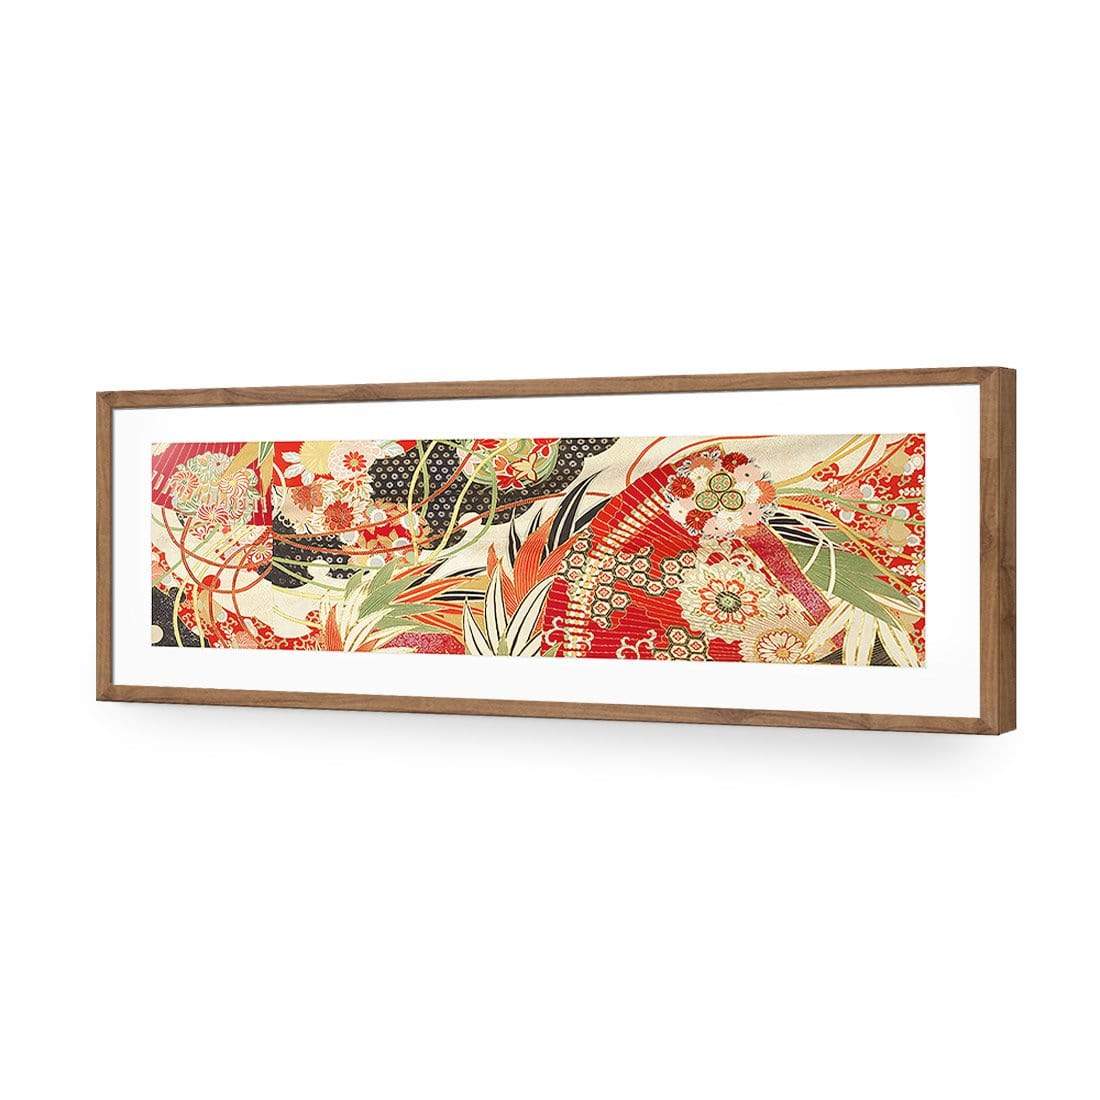 Japanese Fabric Red Flowers and Fans - wallart-australia - Acrylic Glass With Border